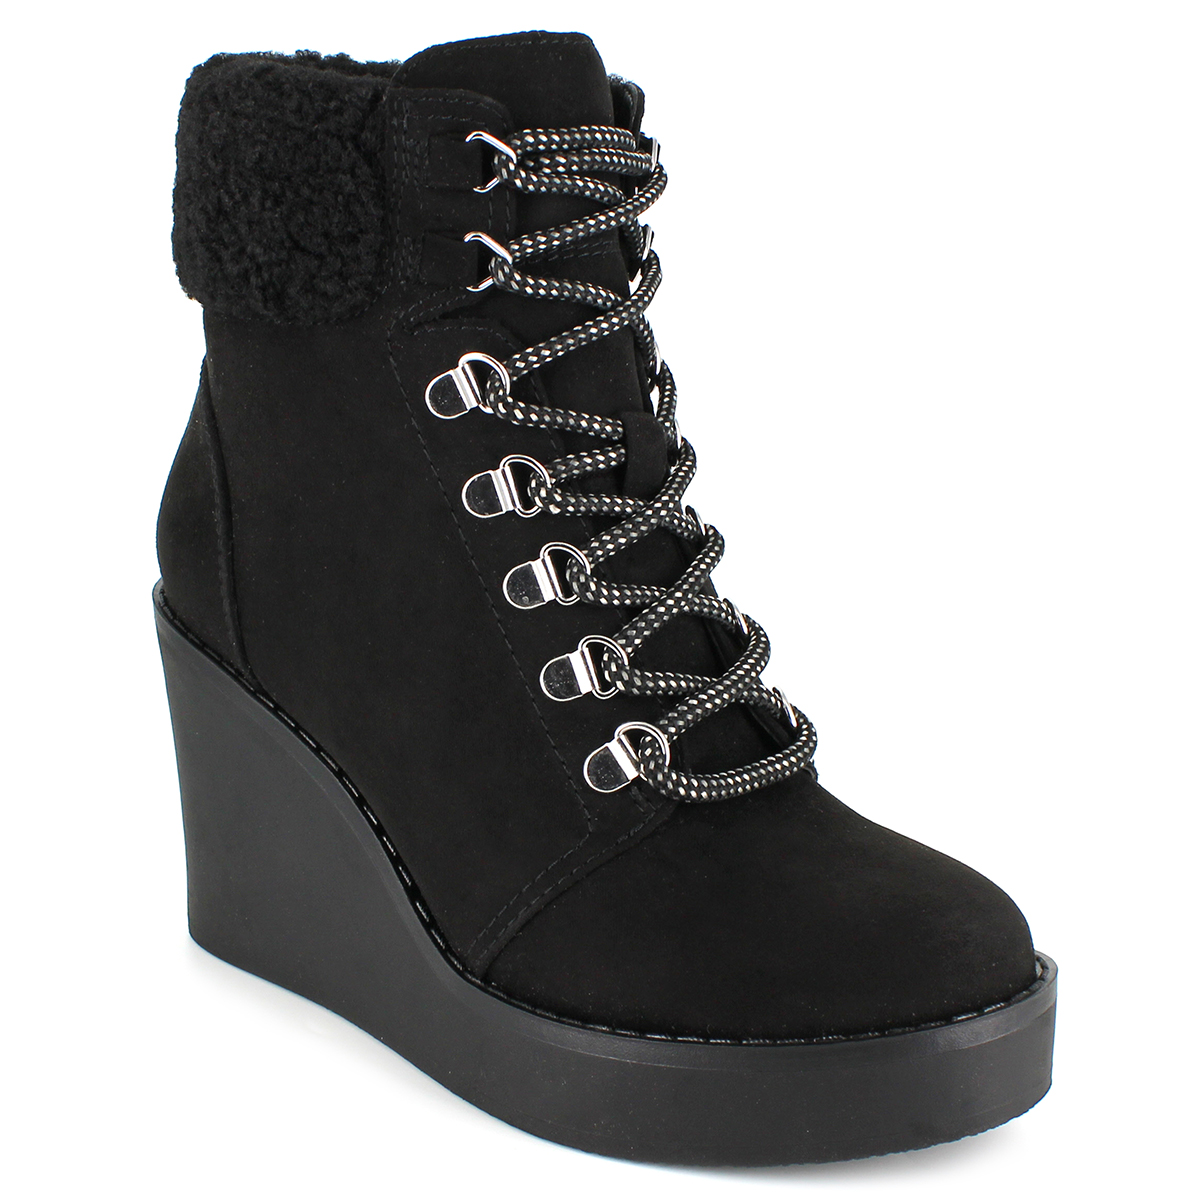 Womens Esprit Roxy Wedged Ankle Boots